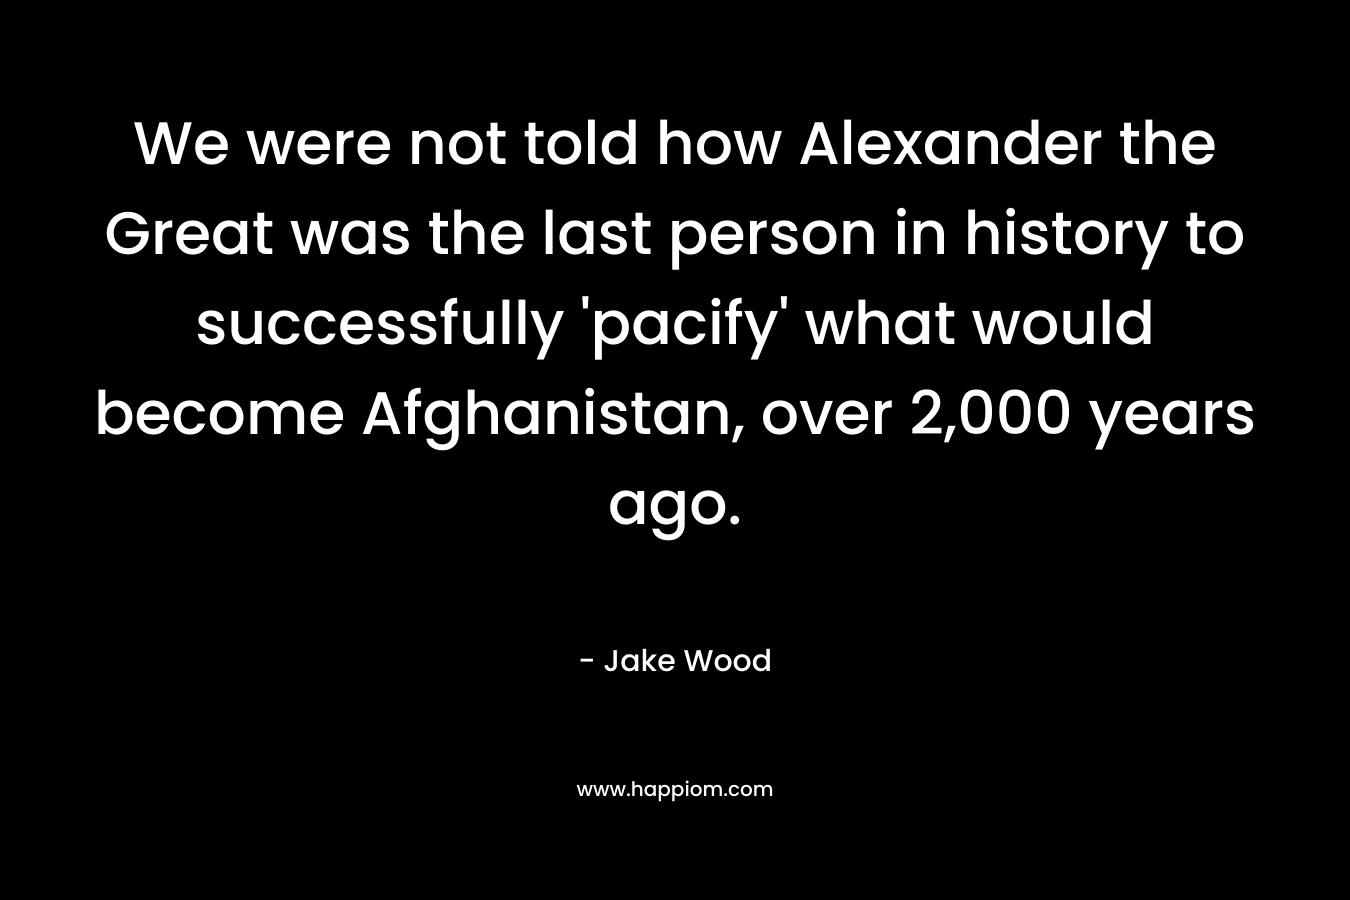 We were not told how Alexander the Great was the last person in history to successfully 'pacify' what would become Afghanistan, over 2,000 years ago.